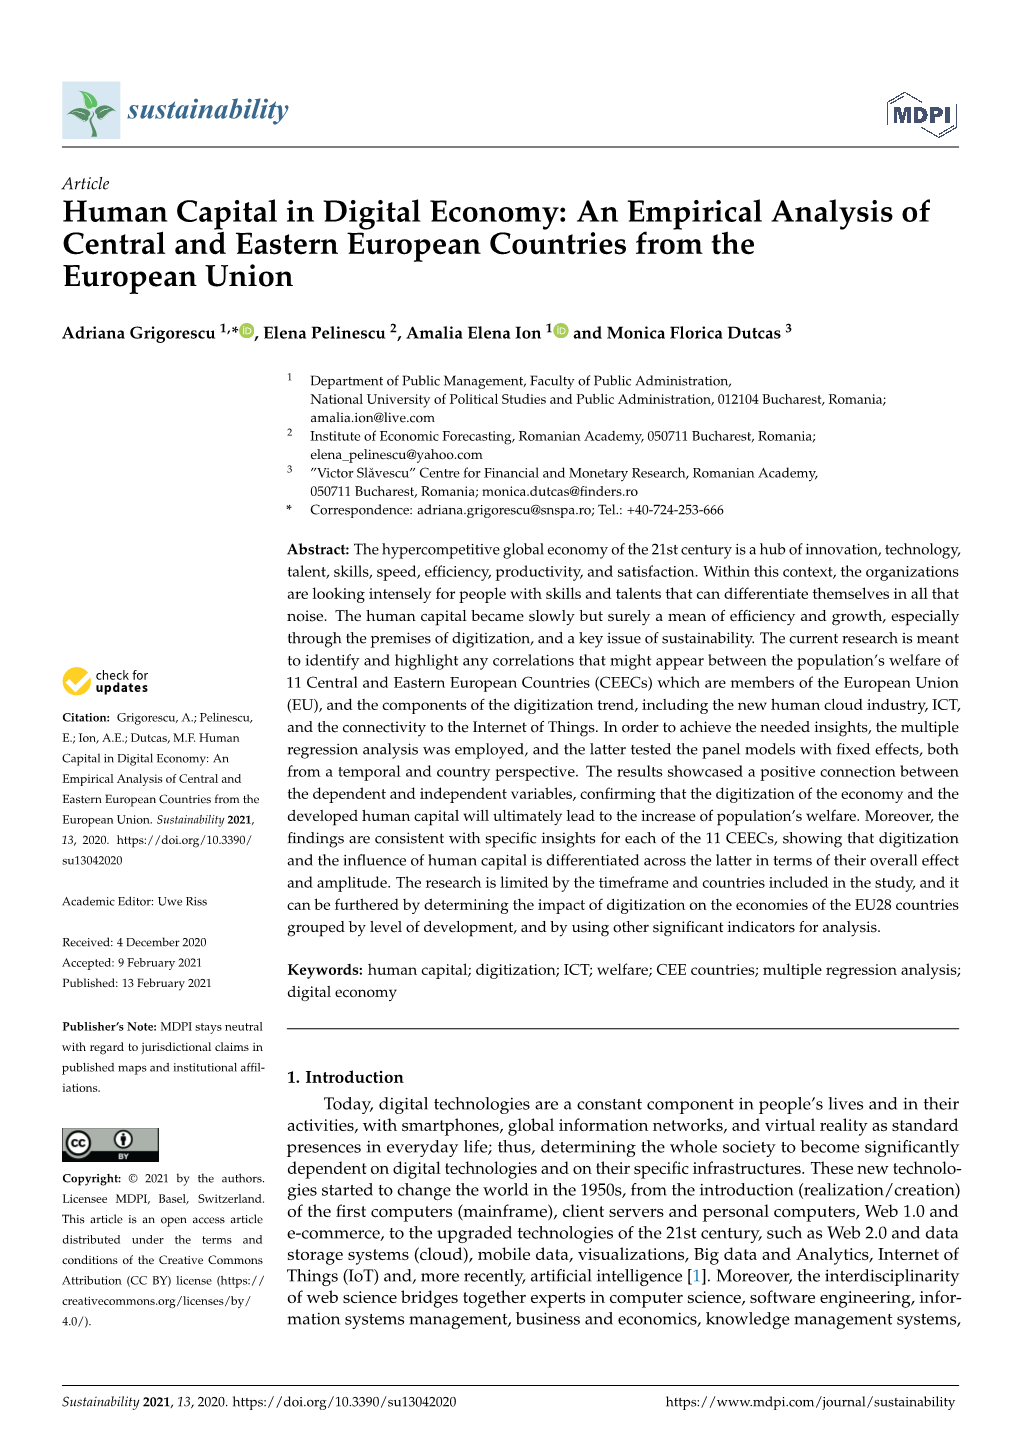 Human Capital in Digital Economy: an Empirical Analysis of Central and Eastern European Countries from the European Union